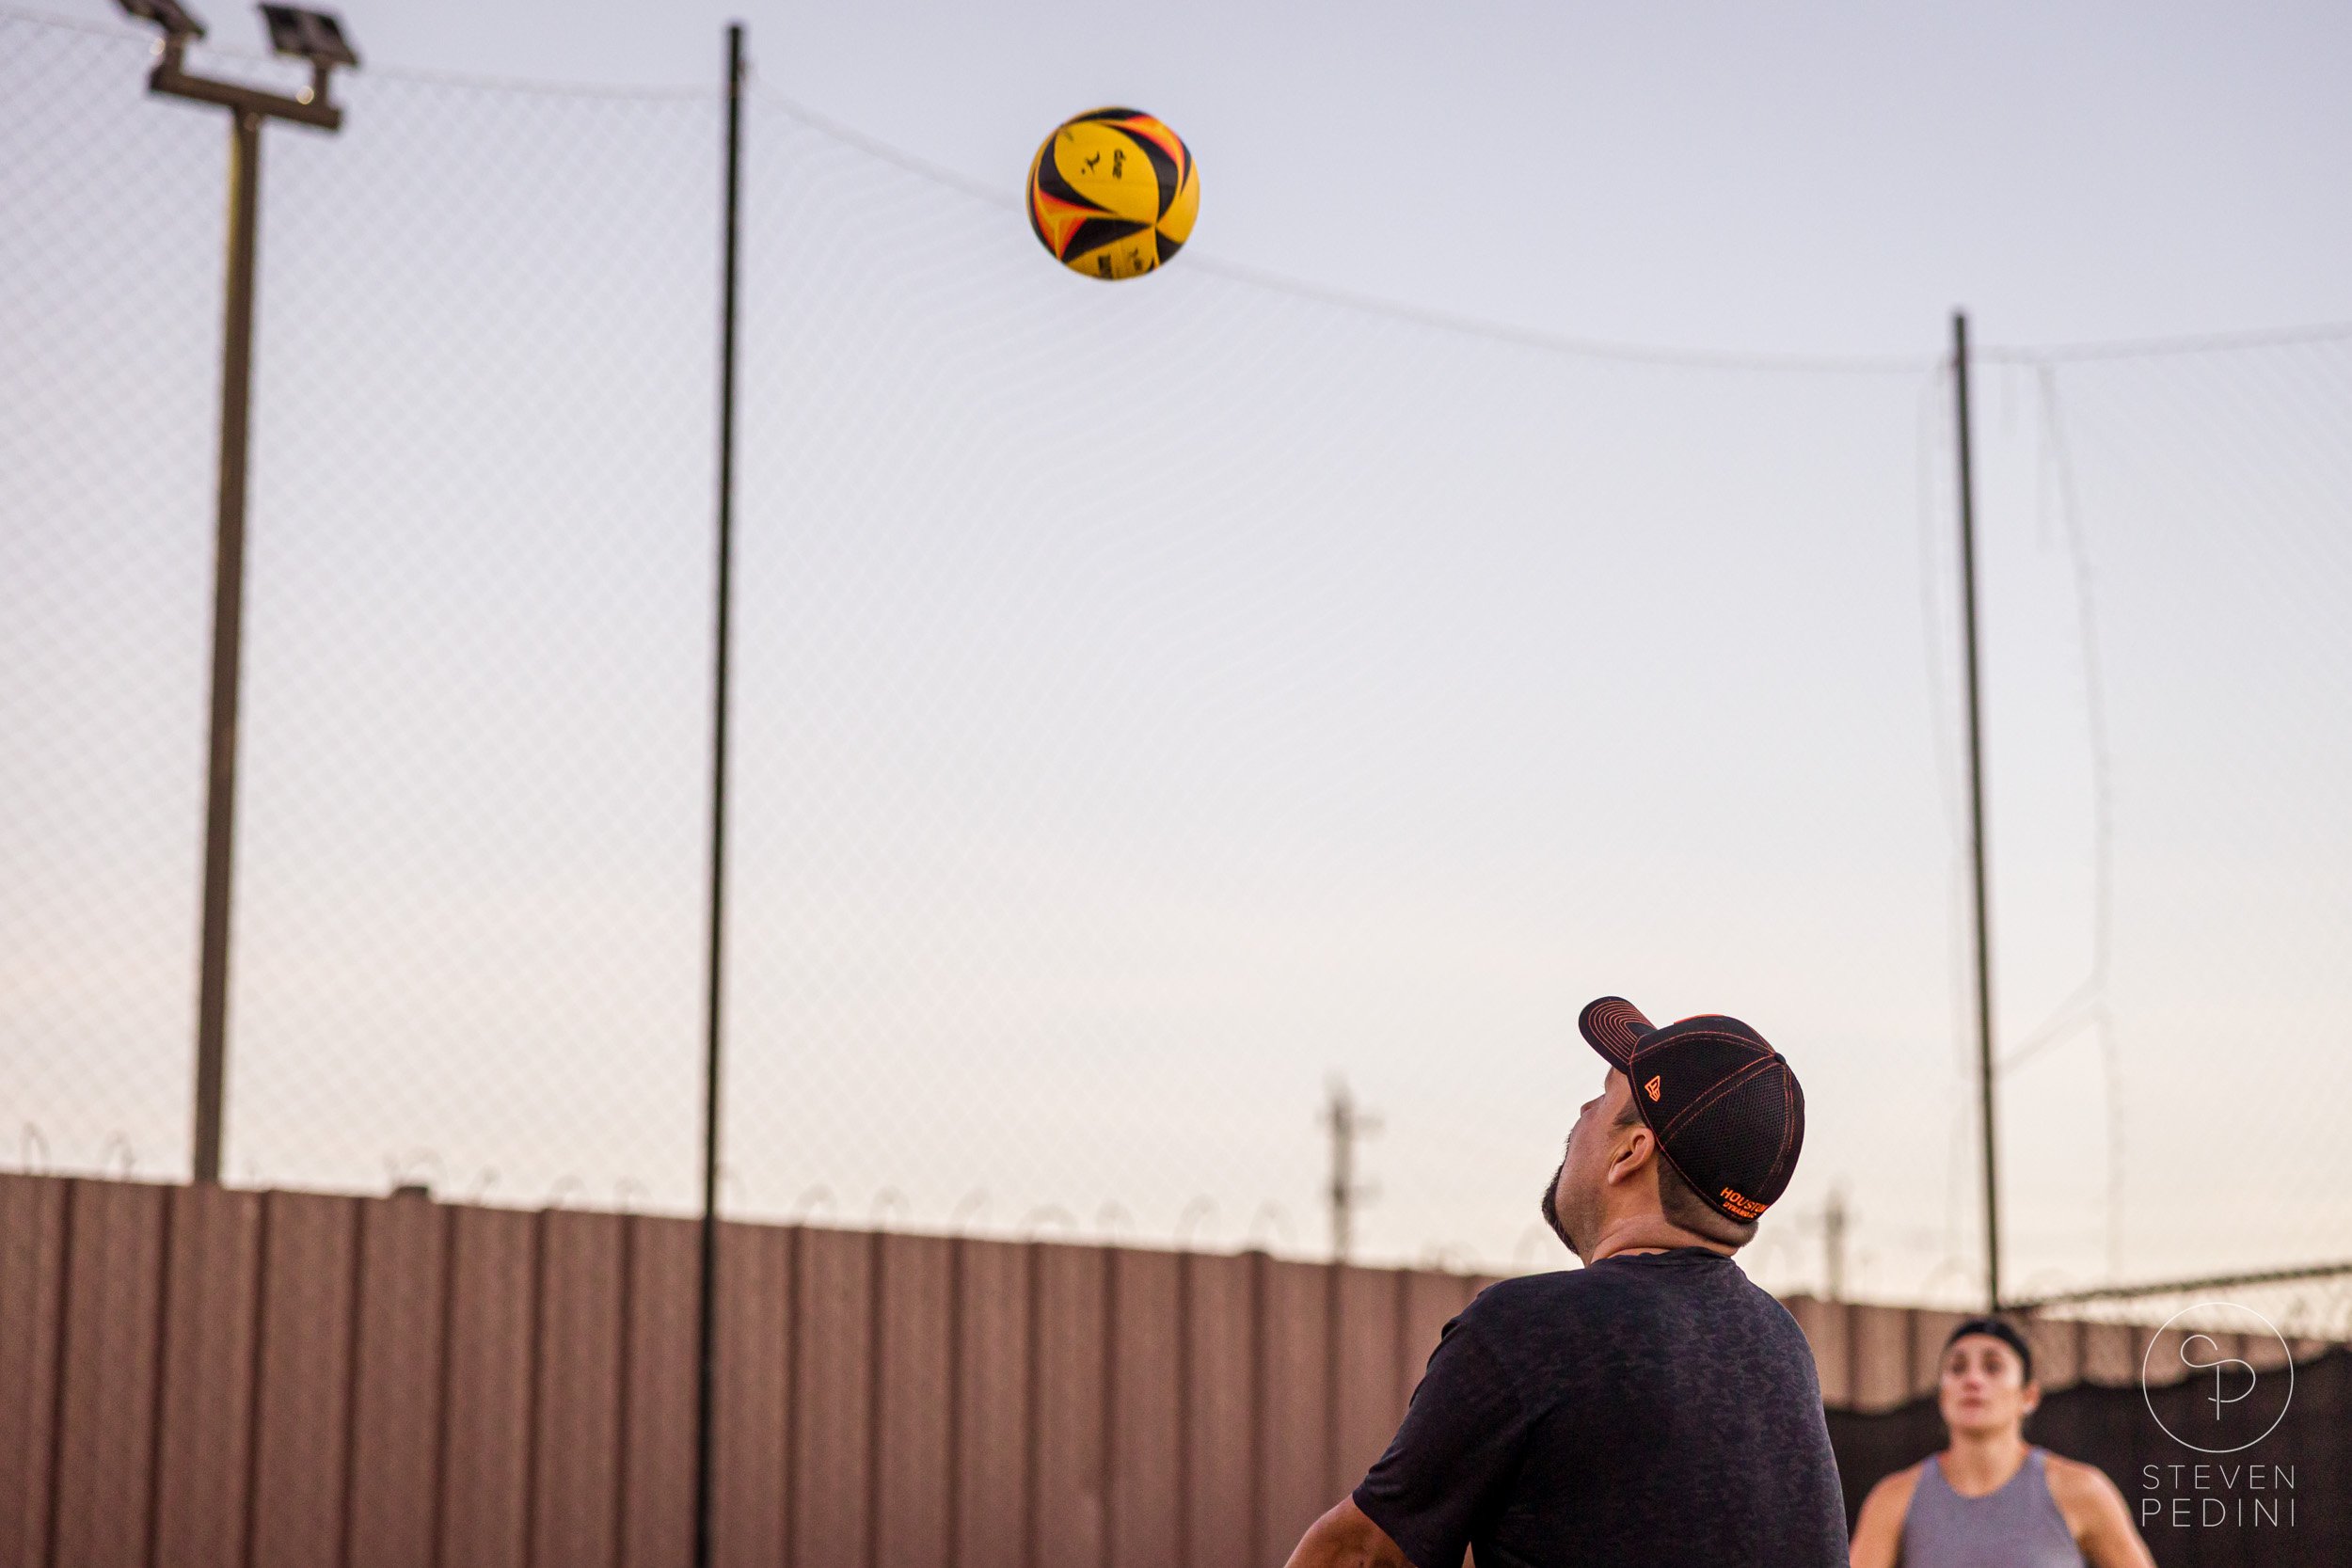 Steven Pedini Photography - Bumpy Pickle - Sand Volleyball - Houston TX - World Cup of Volleyball - 00246.jpg